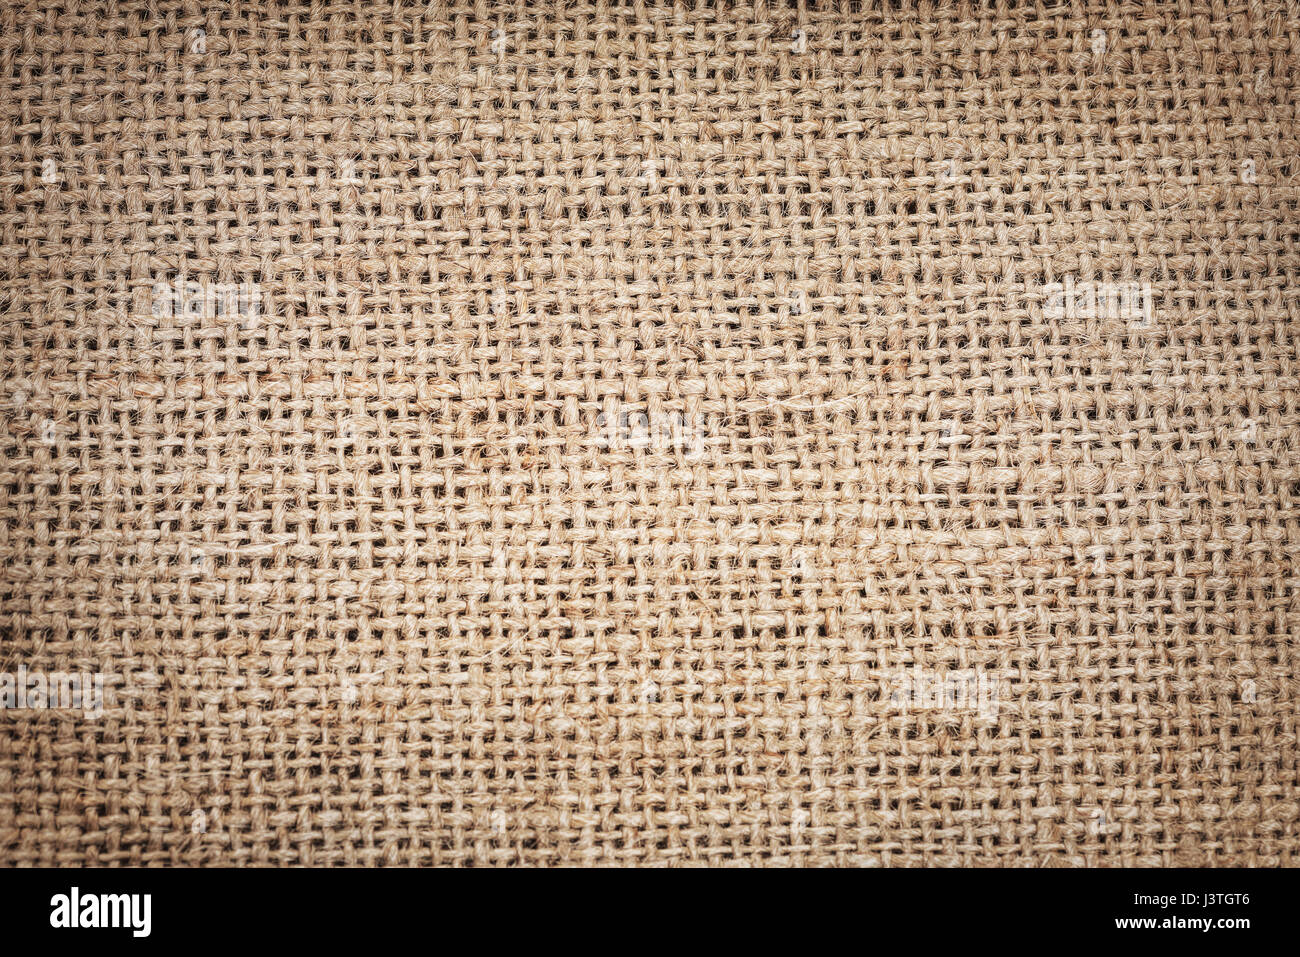 Sackcloth texture for background Stock Photo